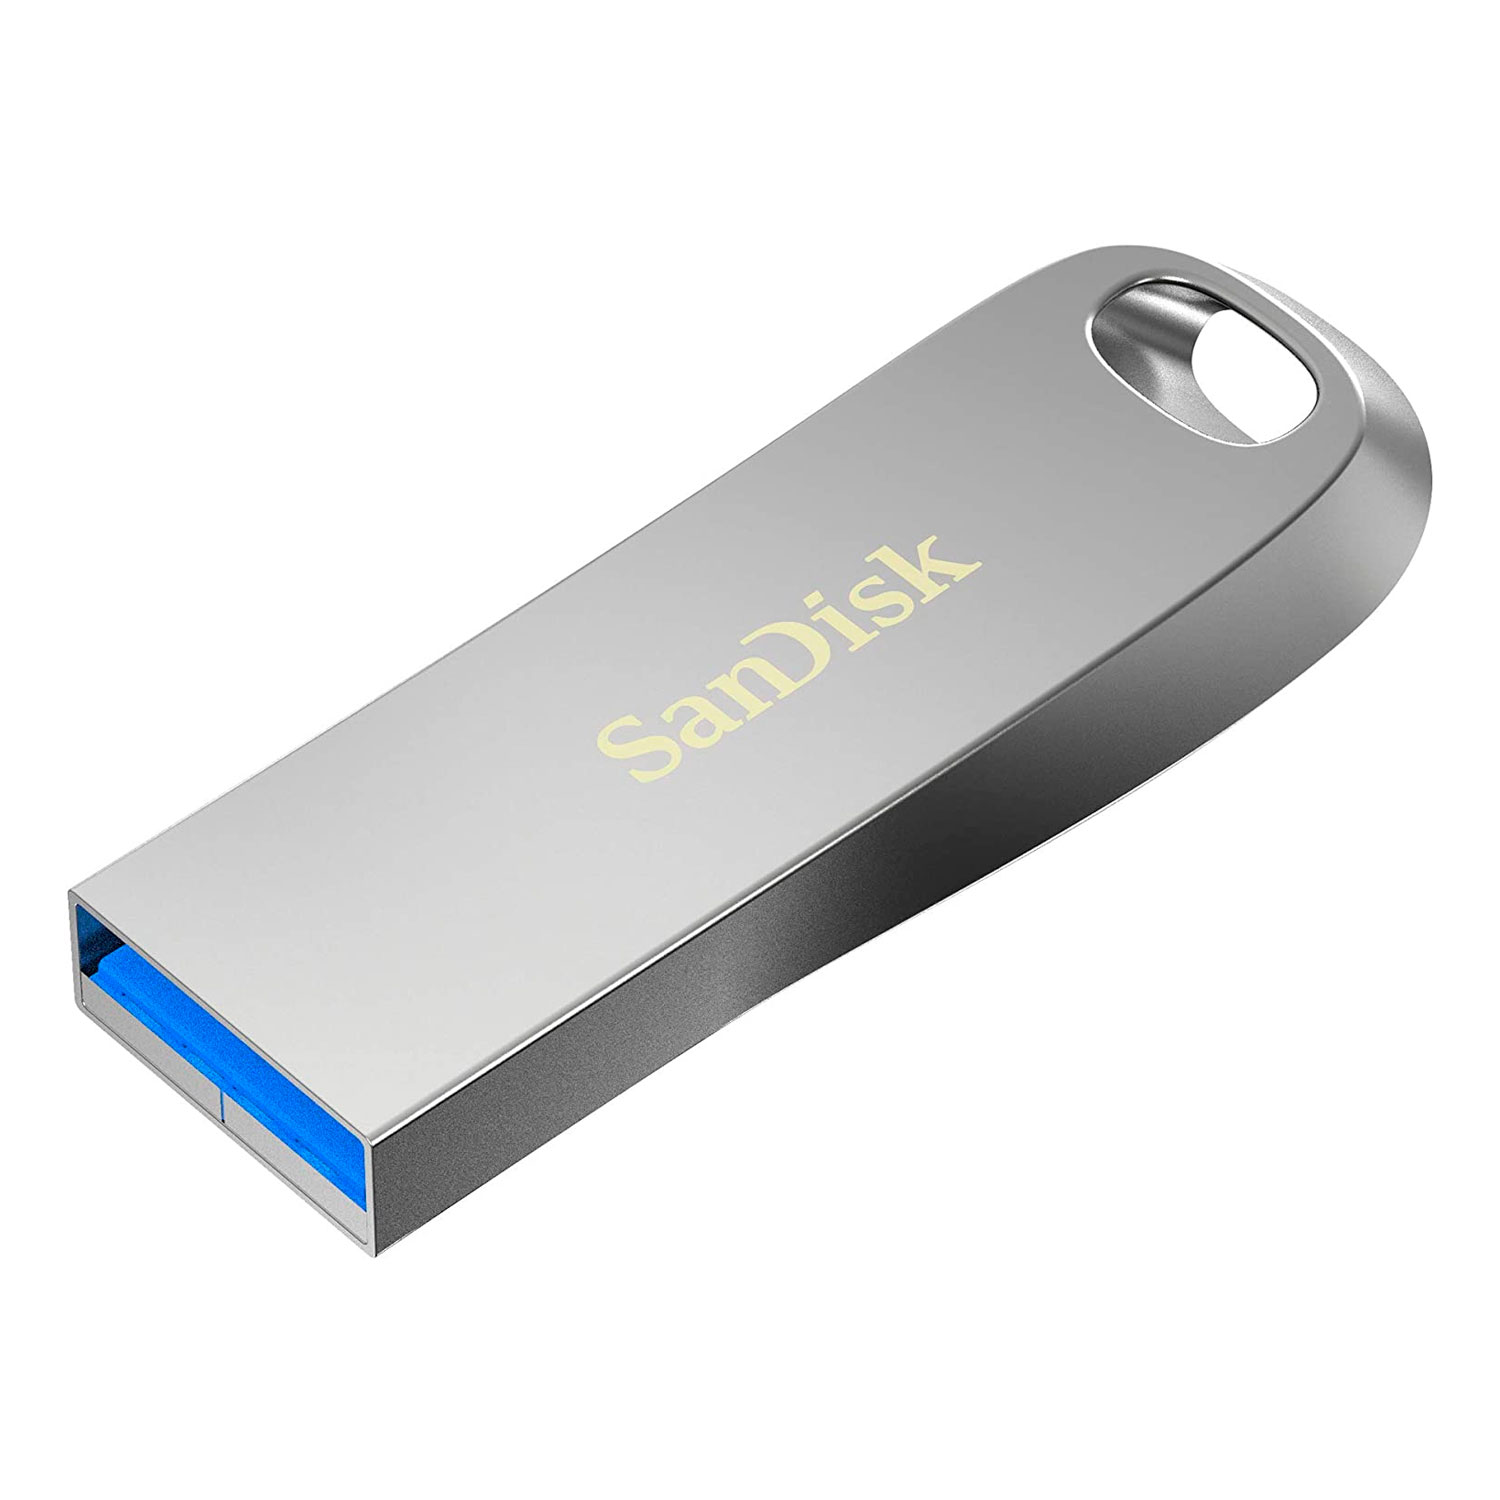 Pendrive Sandisk Ultra Luxe 64GB USB 3.1 - Prata DCZ74-064G-G46